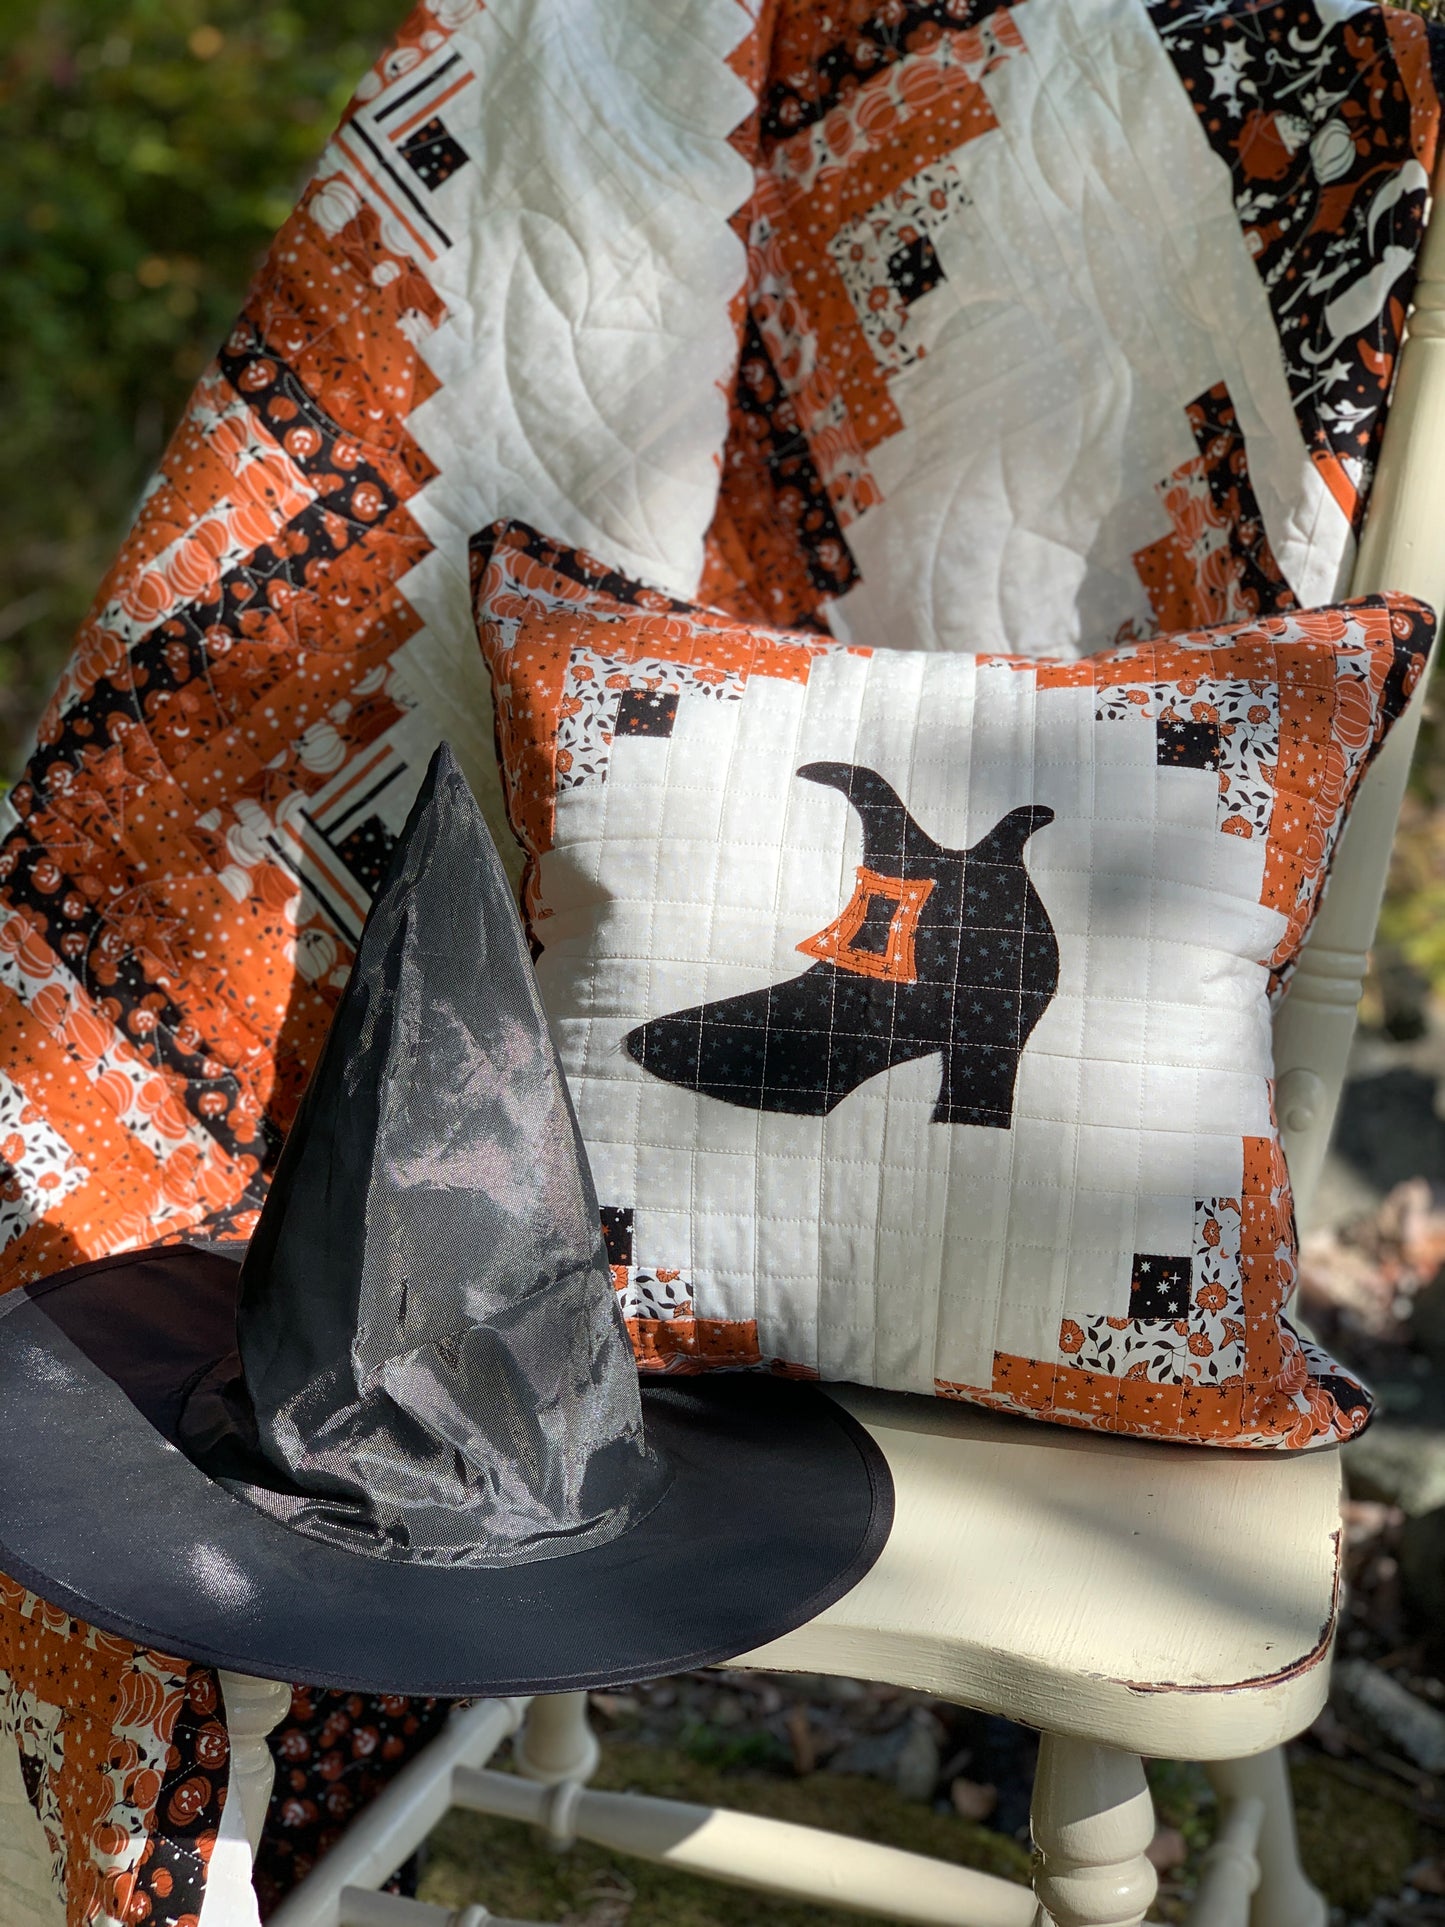 Spellbound "Witchy Delight" Quilt + Pillow Pattern (Downloadable PDF)